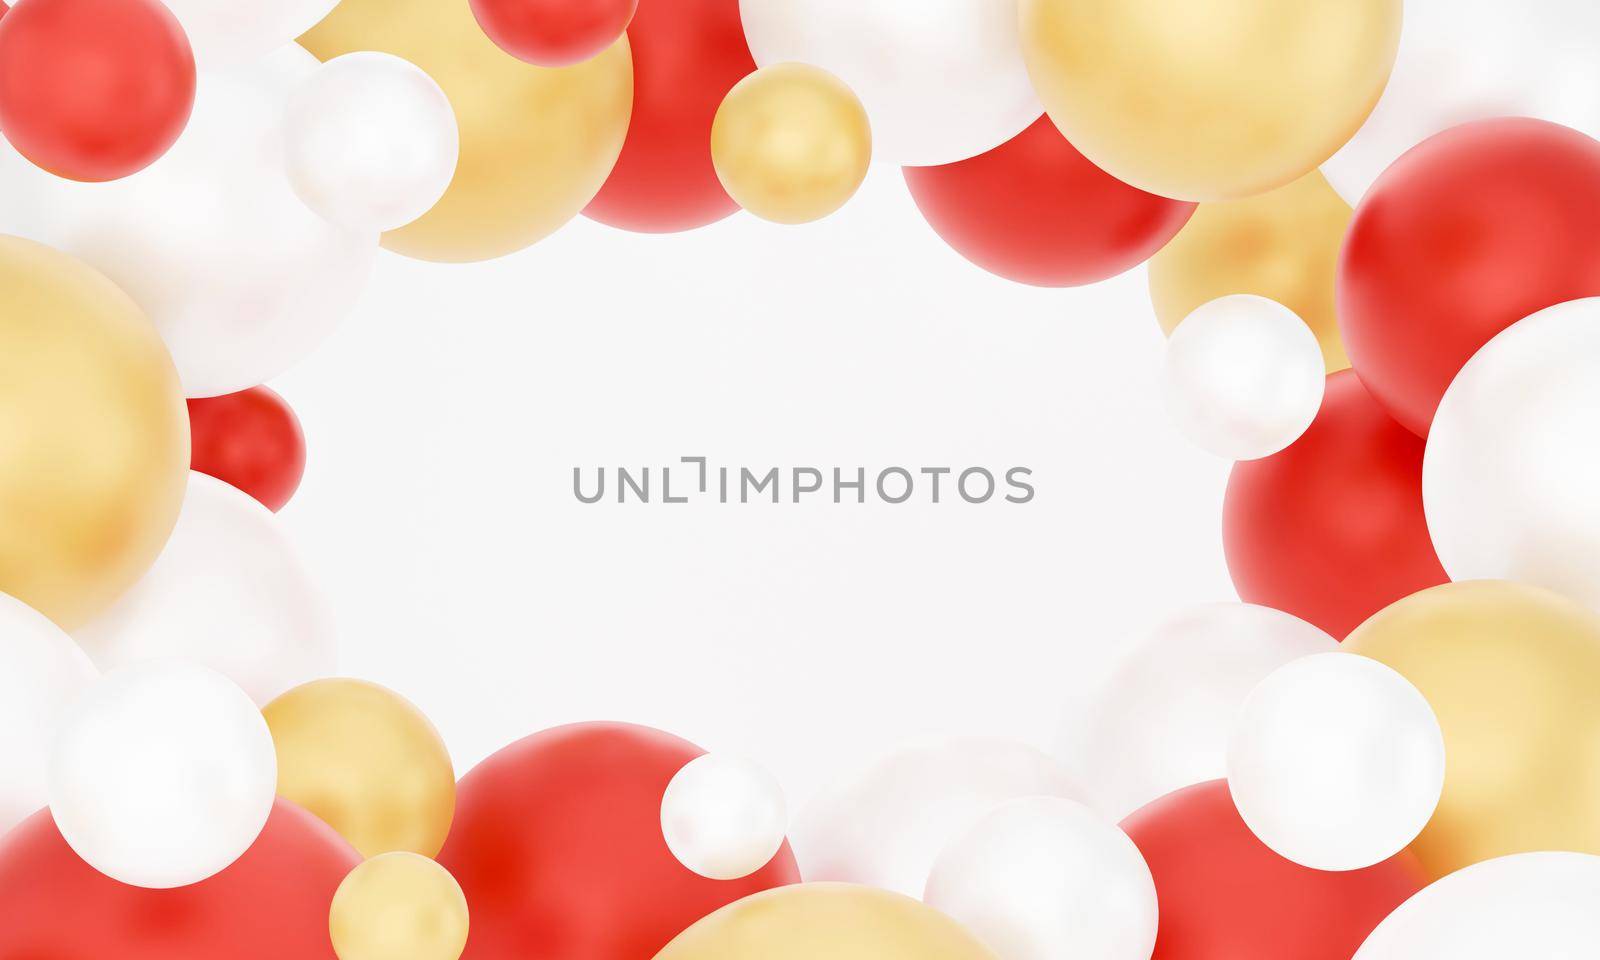 3d render abstract background frame with gold, red and white balls. multicolored balloons, geometric background, primitive shapes, minimalistic design, party decoration, plastic toys by lunarts